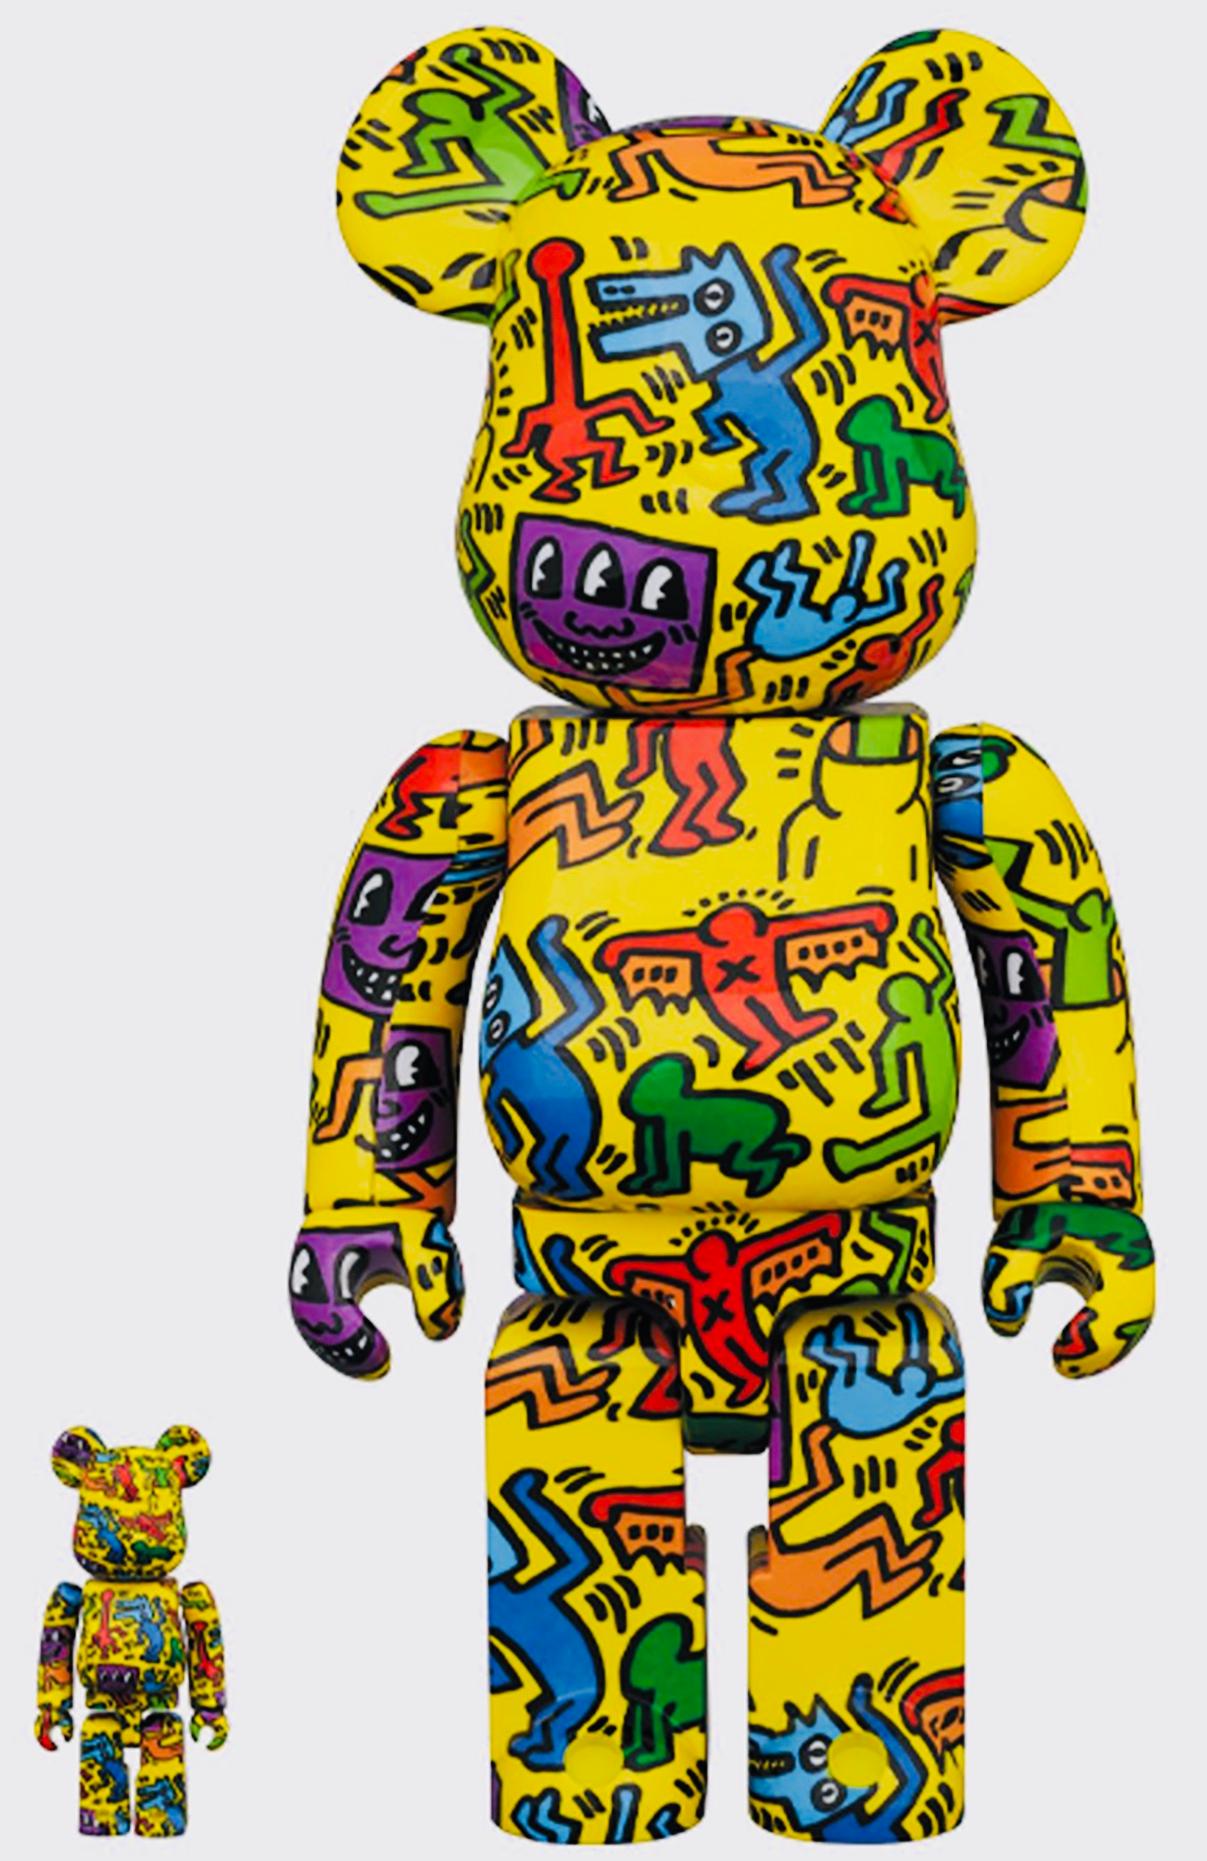 Keith Haring Bearbrick 400 % Companion (Haring BE@RBRICK) (Schwarz), Figurative Sculpture, von (after) Keith Haring